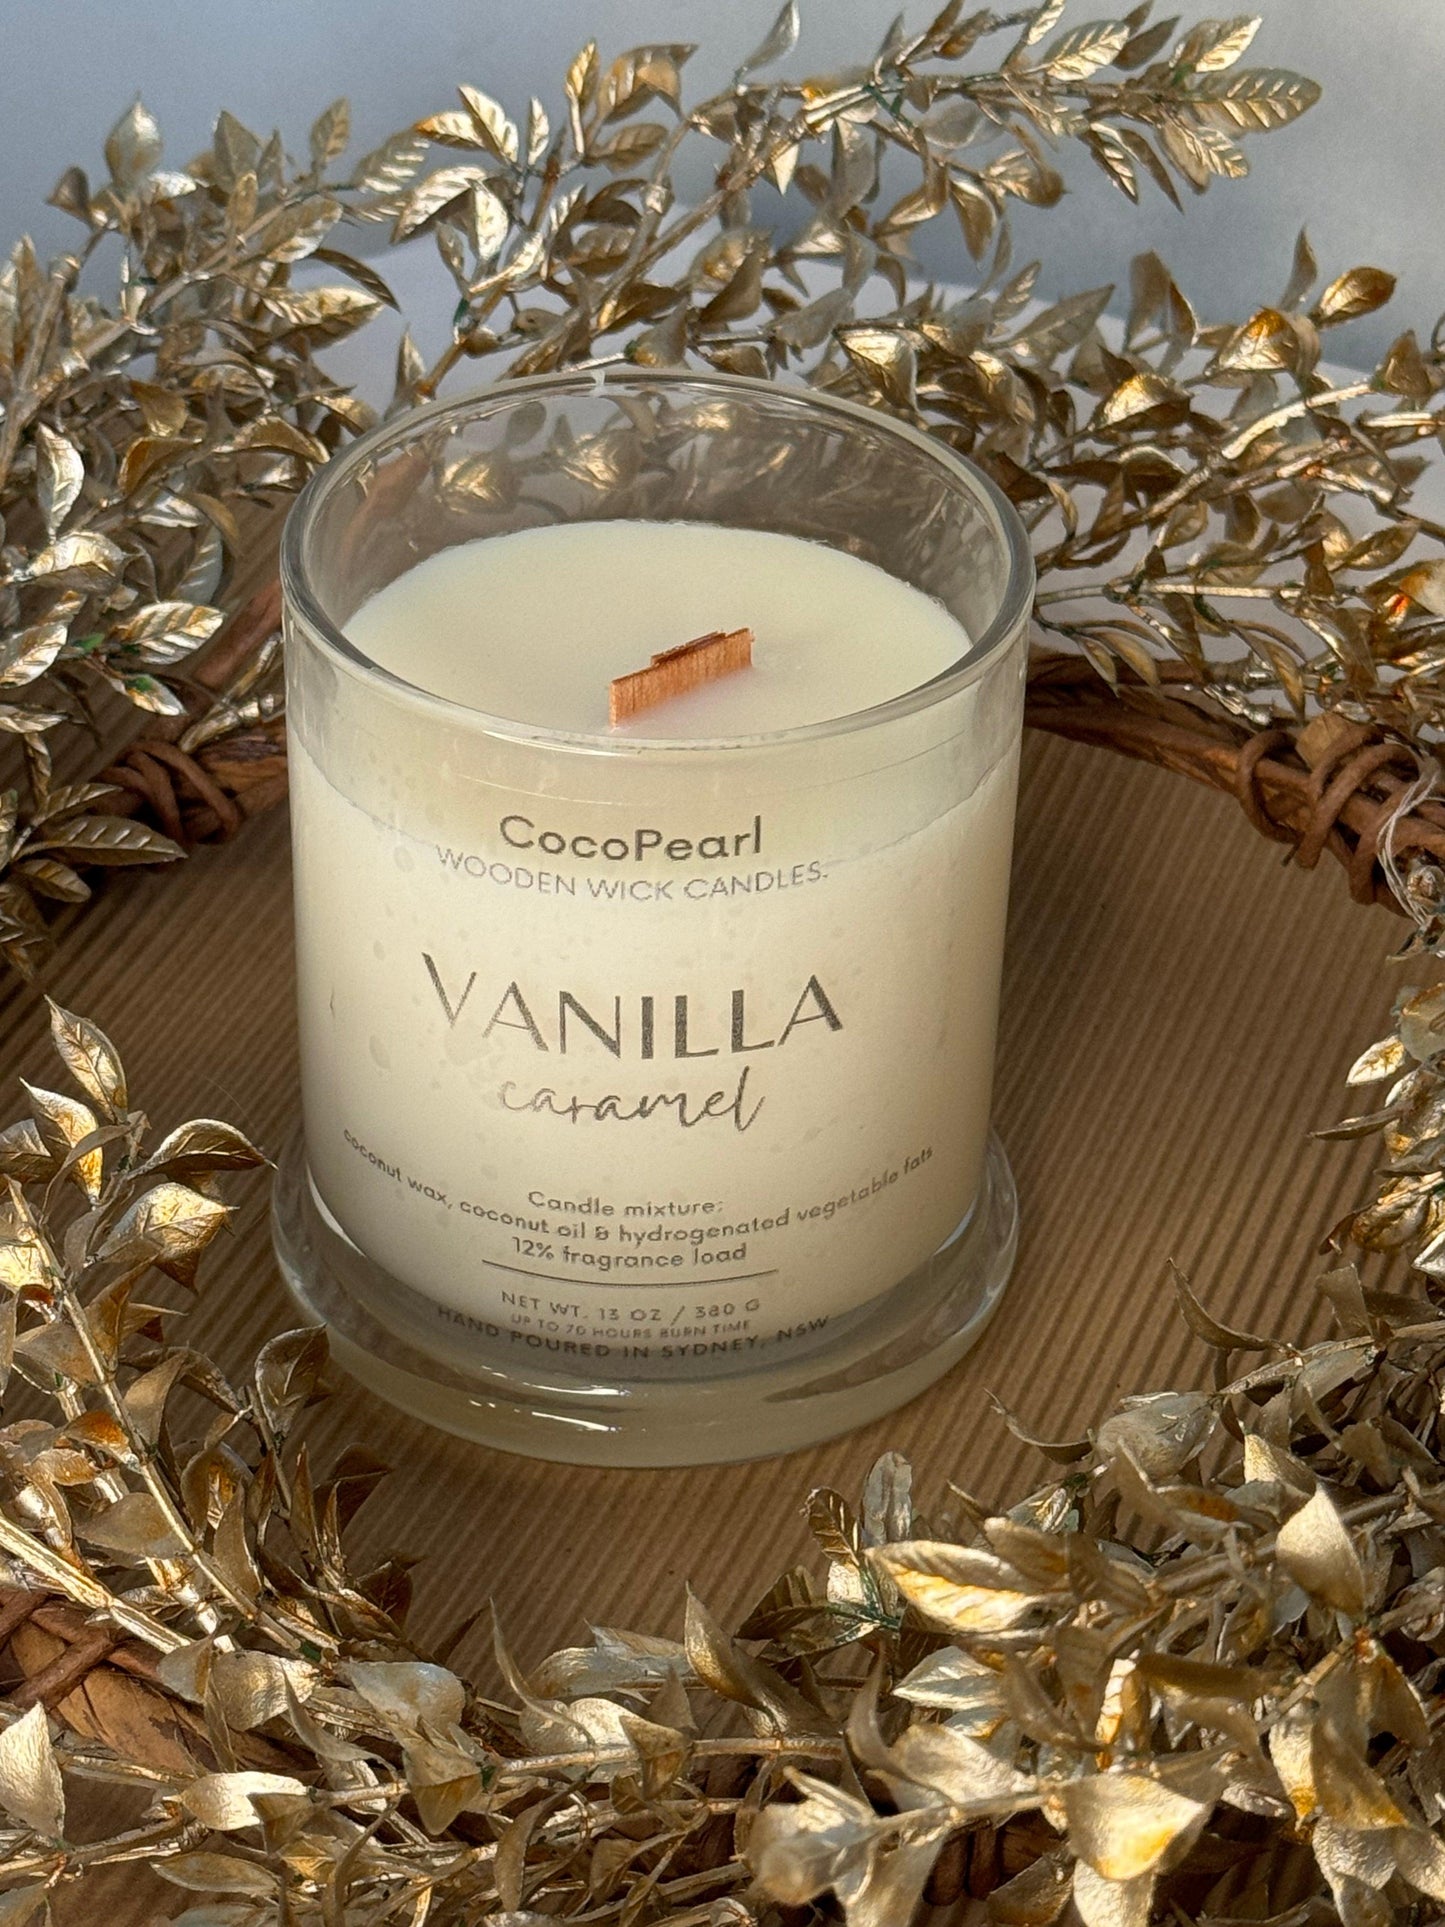 Vanilla caramel | Scented Candle - Wooden wick - Client Photo